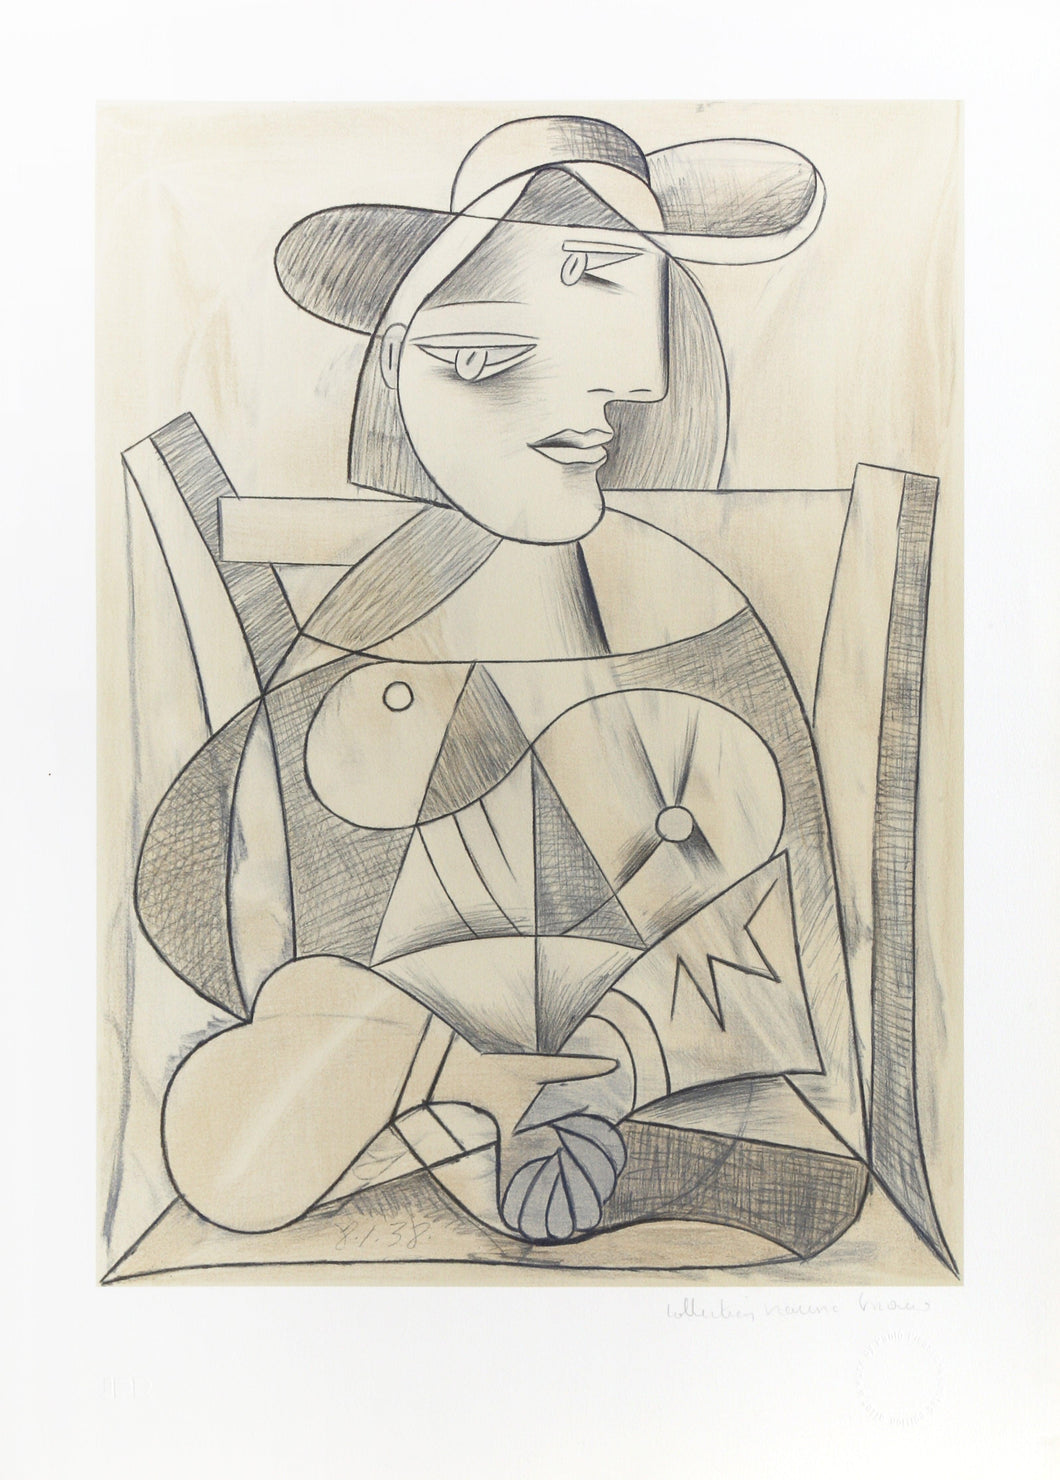 Femme aux Mains Jointes (Marie-Therese Walter) Lithograph | Pablo Picasso,{{product.type}}